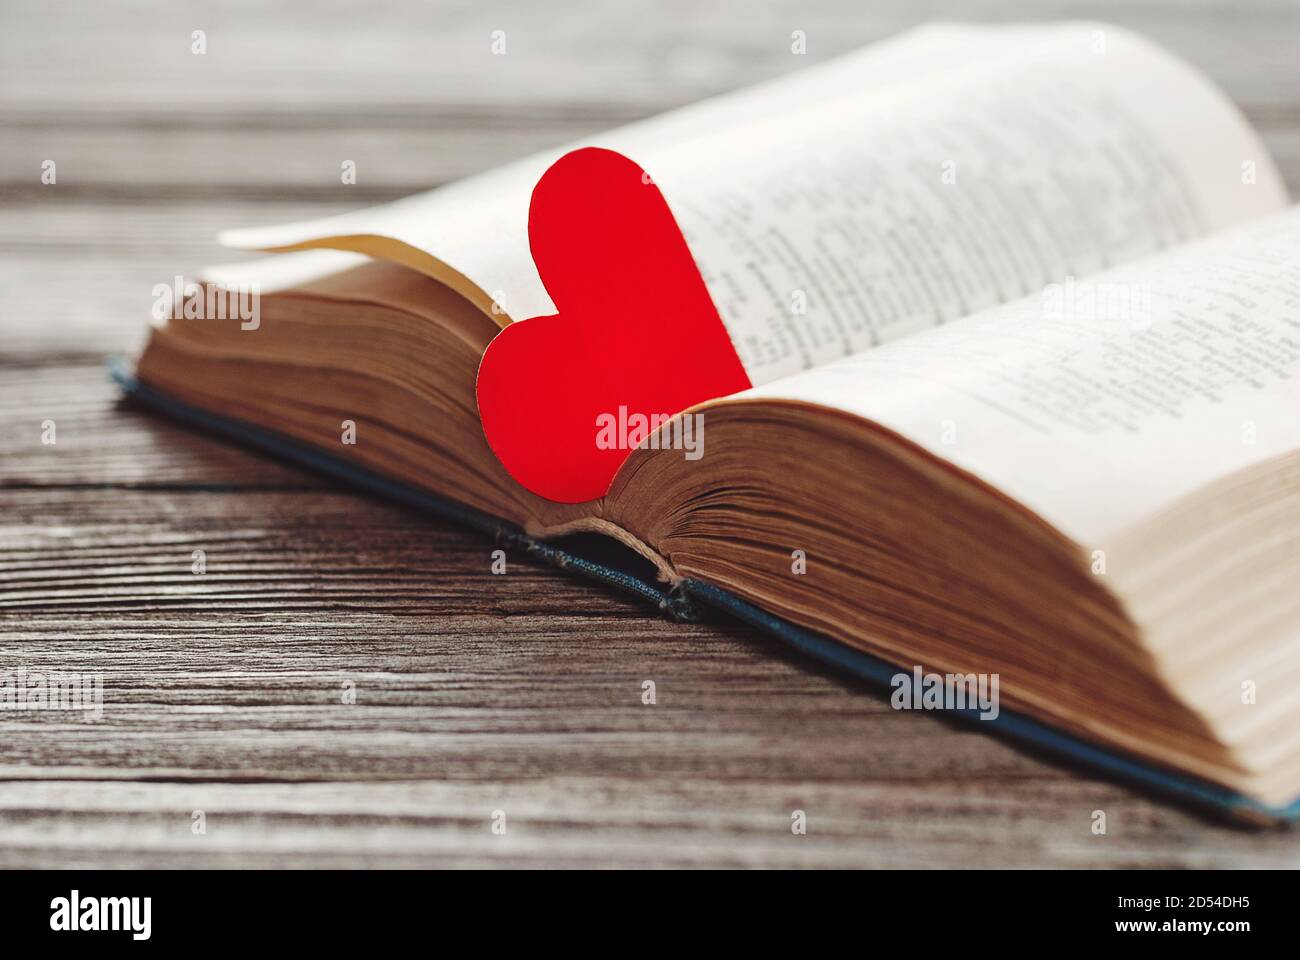 open book with red heart shaped paper bookmark on wooden background Stock Photo